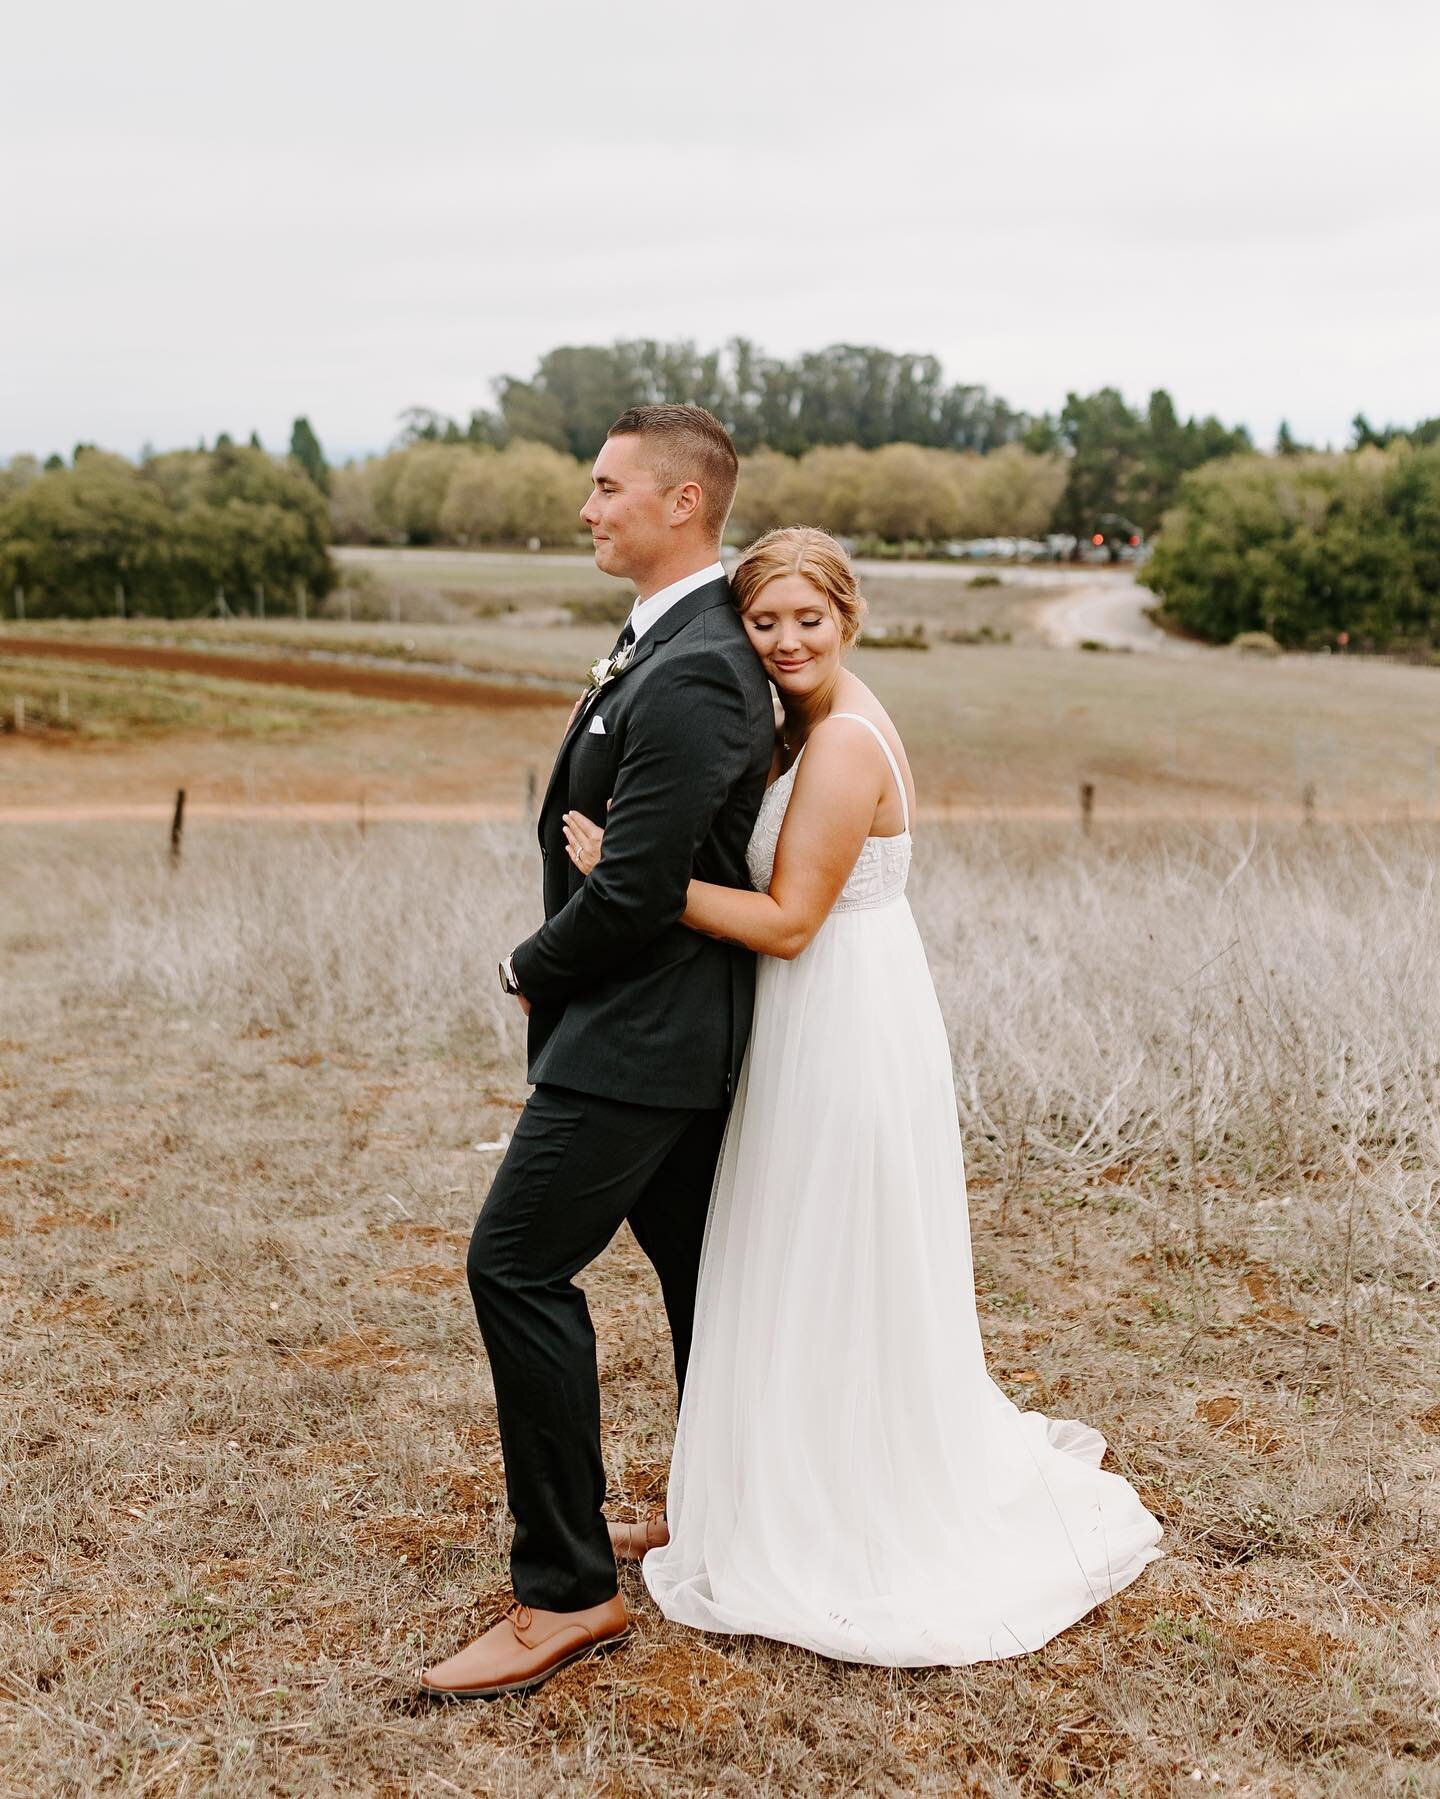 The rain and overcast skies we have had this week make me think about Aileigh and Ryan&rsquo;s wedding from this past October. There is something so cozy about overcast weddings that I&rsquo;ll never get over. It&rsquo;s not even summer yet and I&rsq